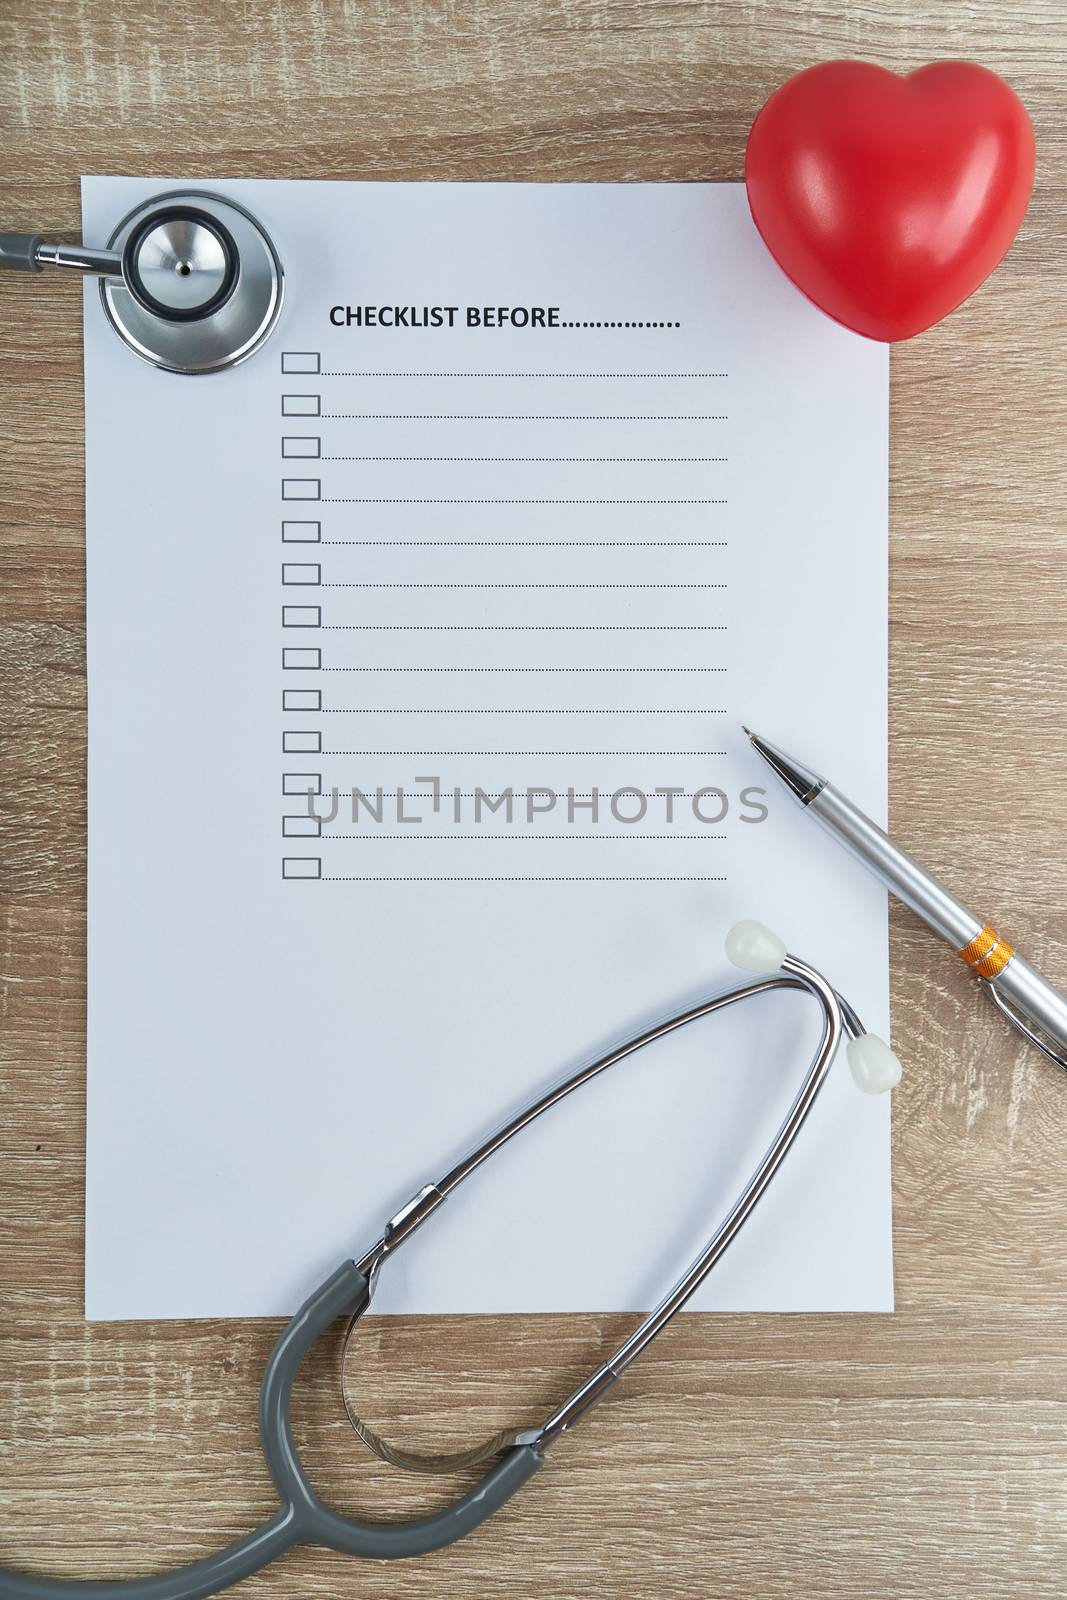 Stethoscope and pen with red heart on empty checklist form by eaglesky